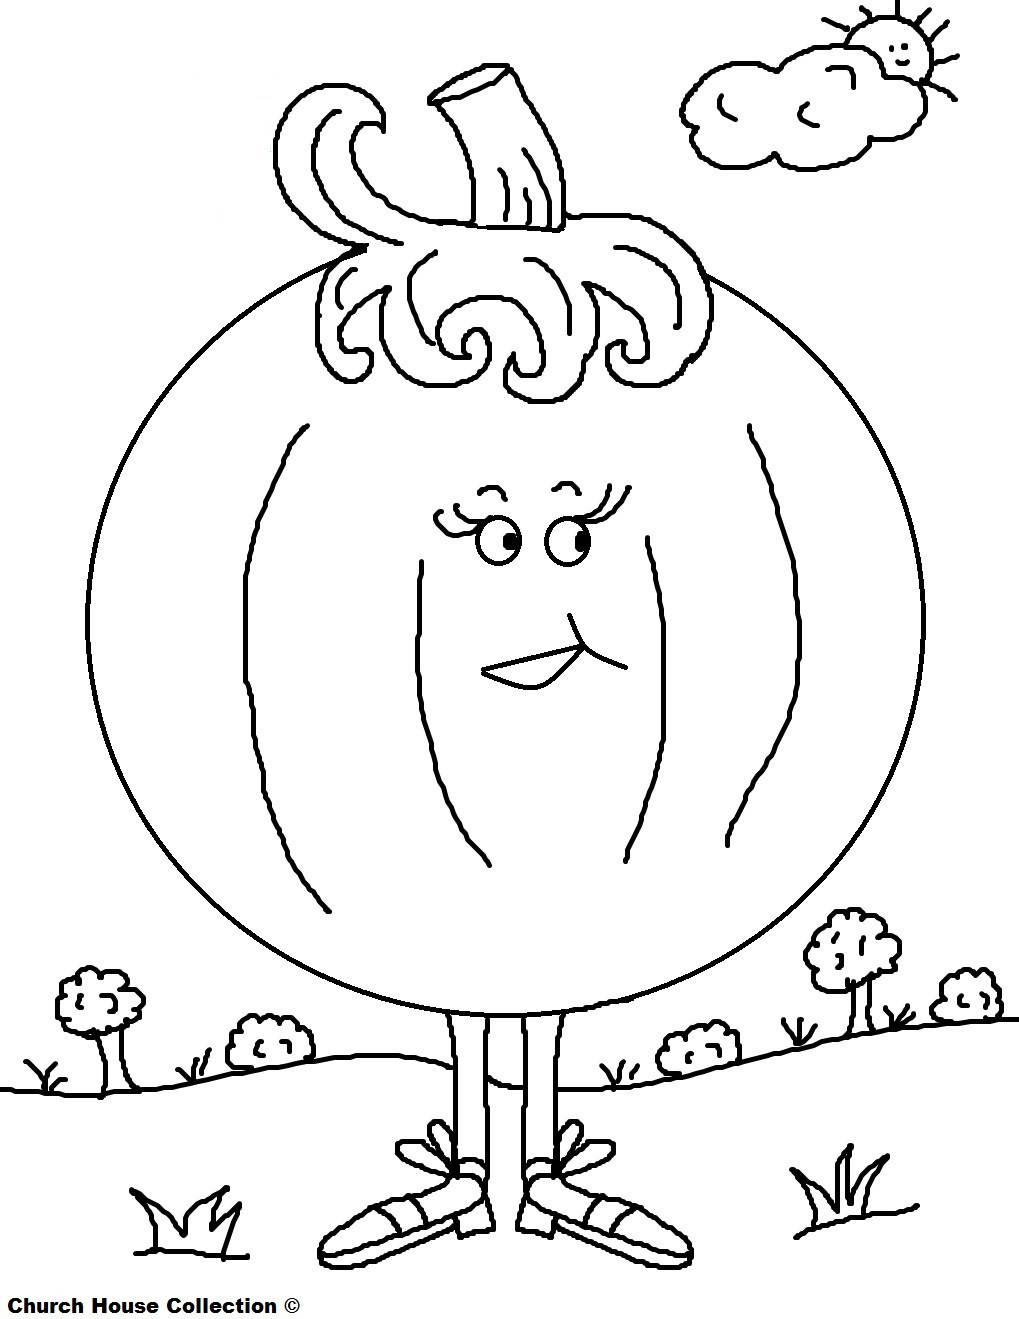 Sunday School Coloring Pages Kids
 Church House Collection Blog Free Printable Pumpkin Coloring Pages For Sunday School Children